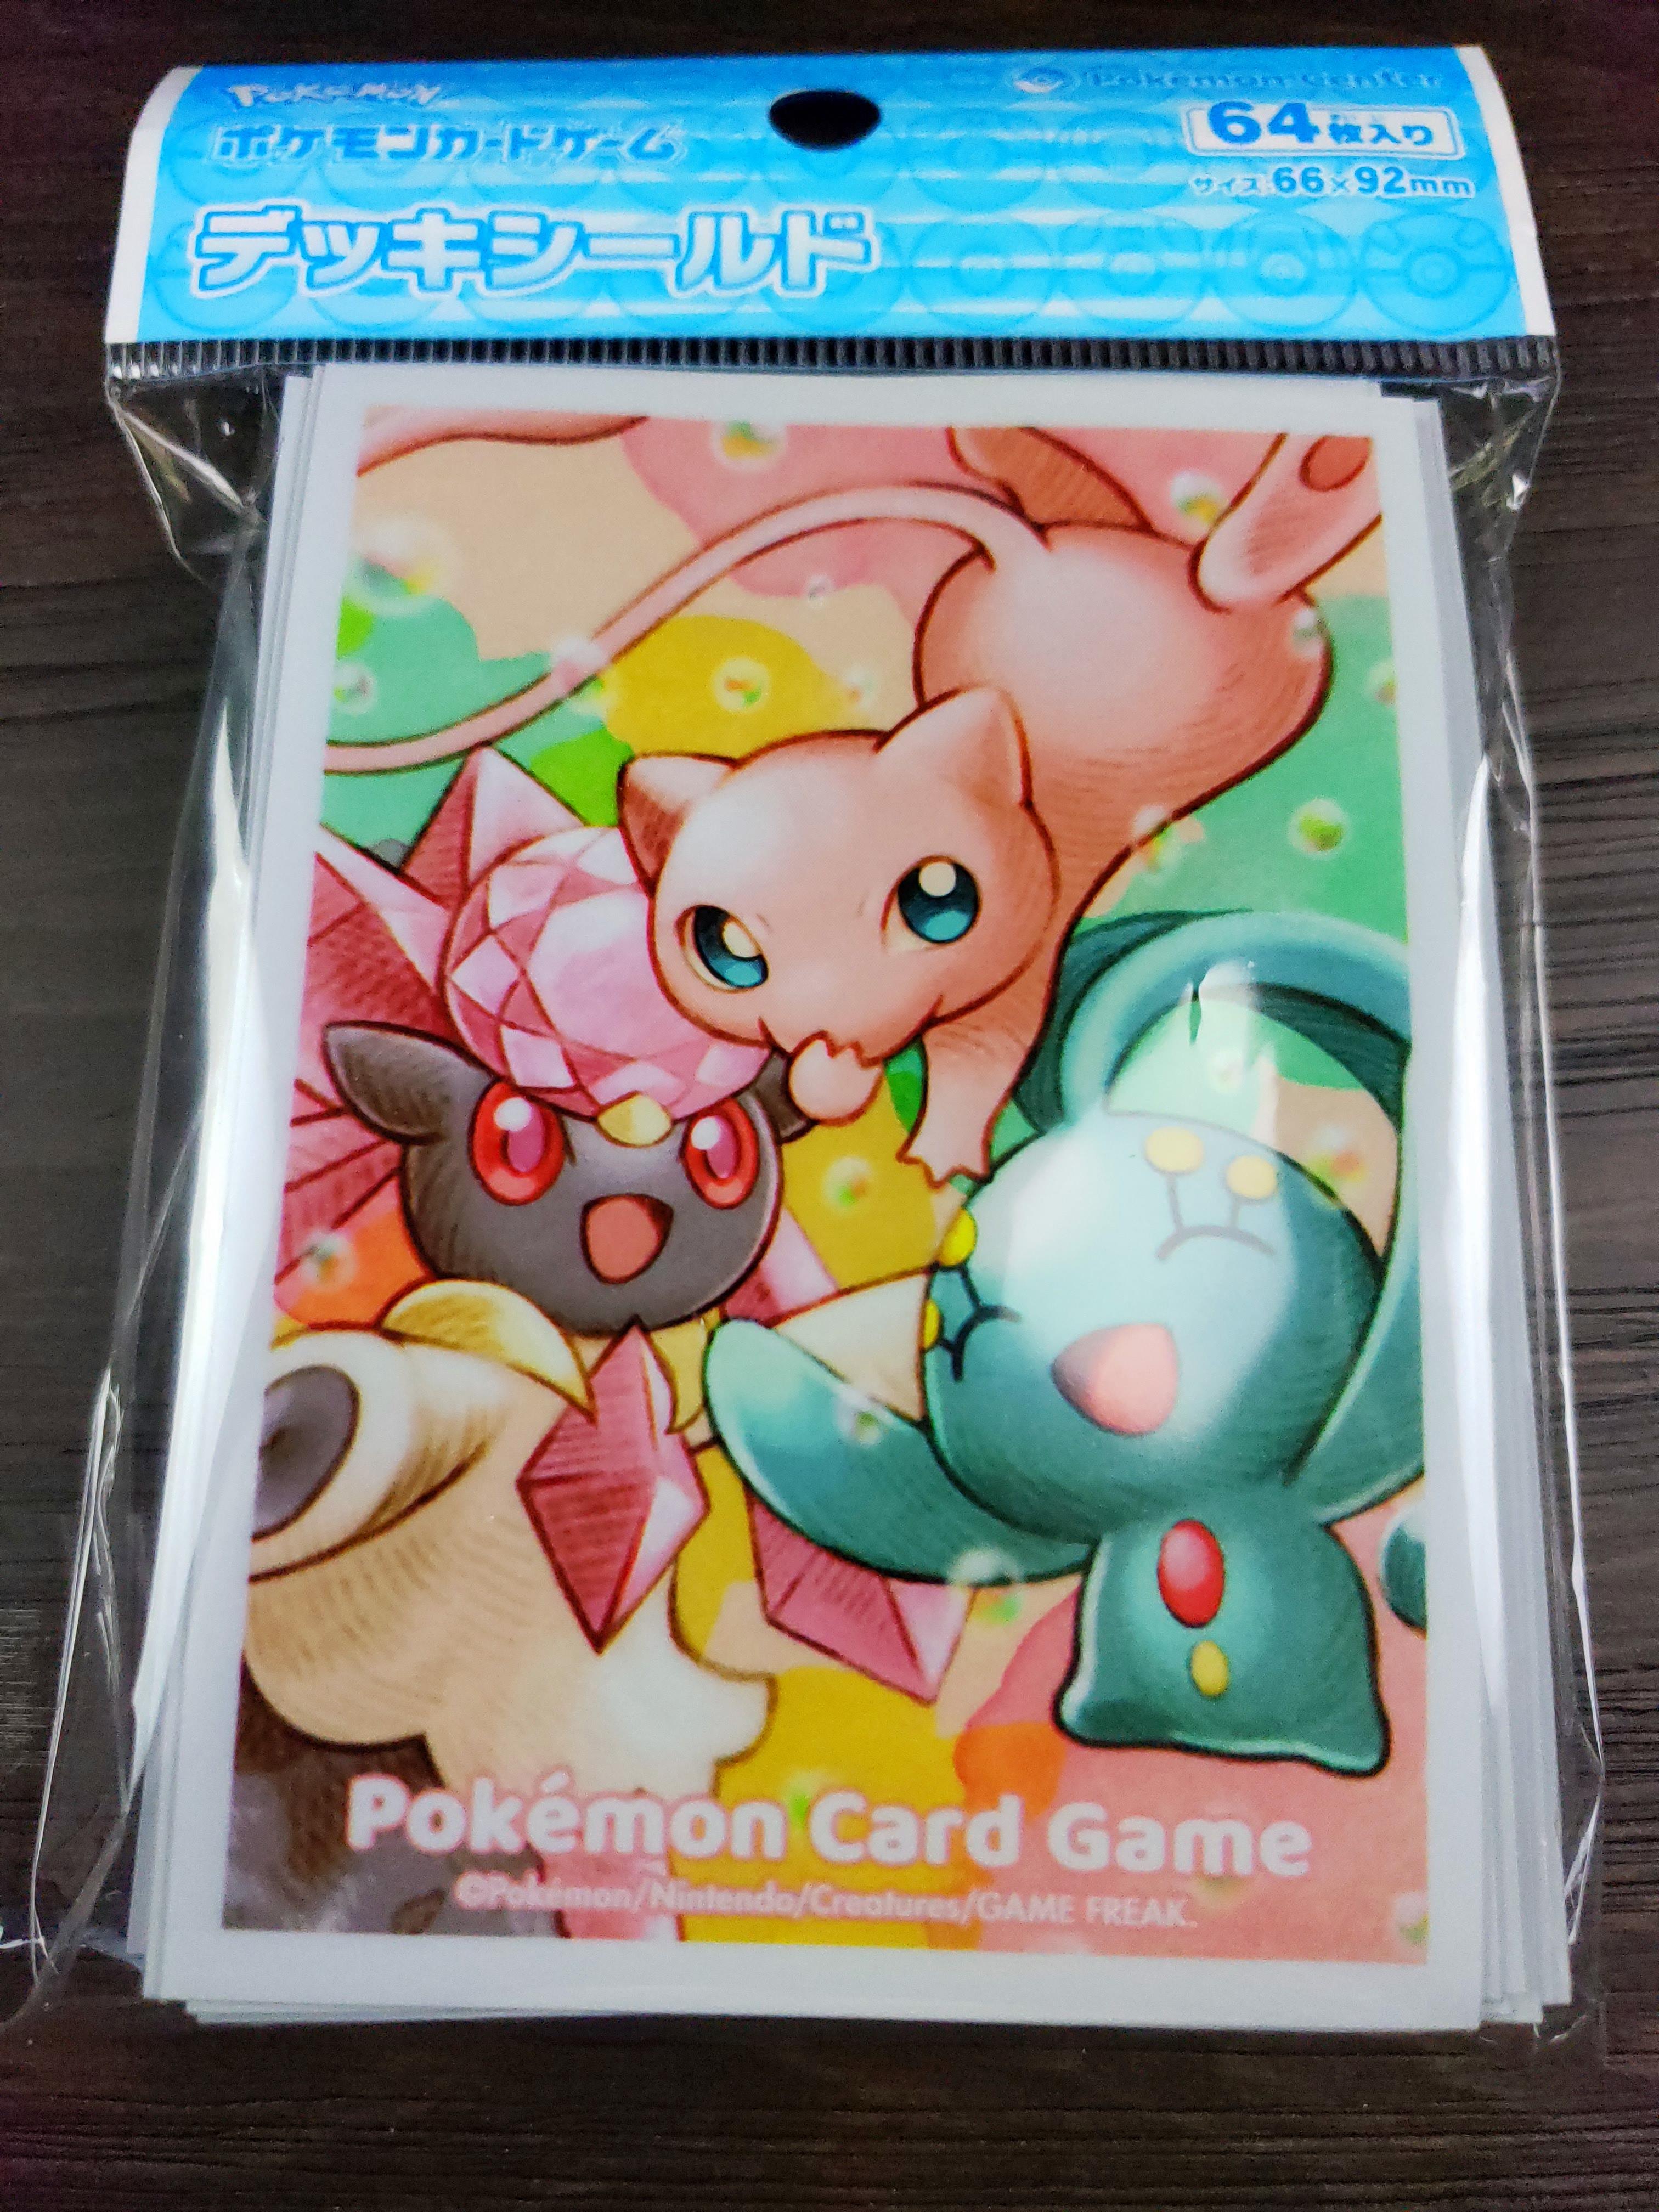 Card Sleeves Mew, Manaphy And Diancie Pokémon Card Game